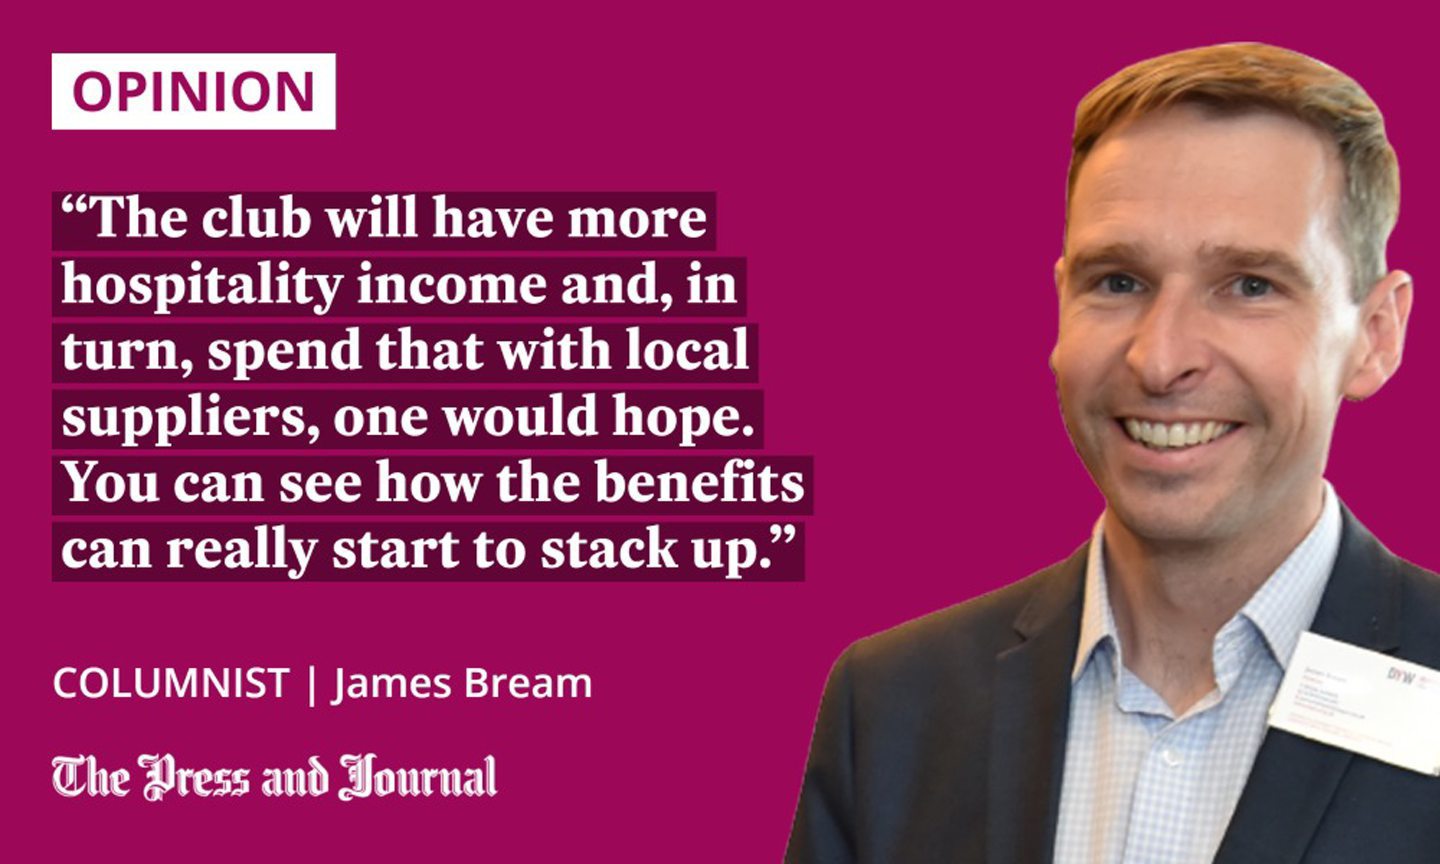 Quotation from columnist James Bream regarding the economic impact of Aberdeen winning against St Mirren: 'The club will have more hospitality income and, in turn, spend that with local suppliers, one would hope. You can see how the benefits can really start to stack up.'